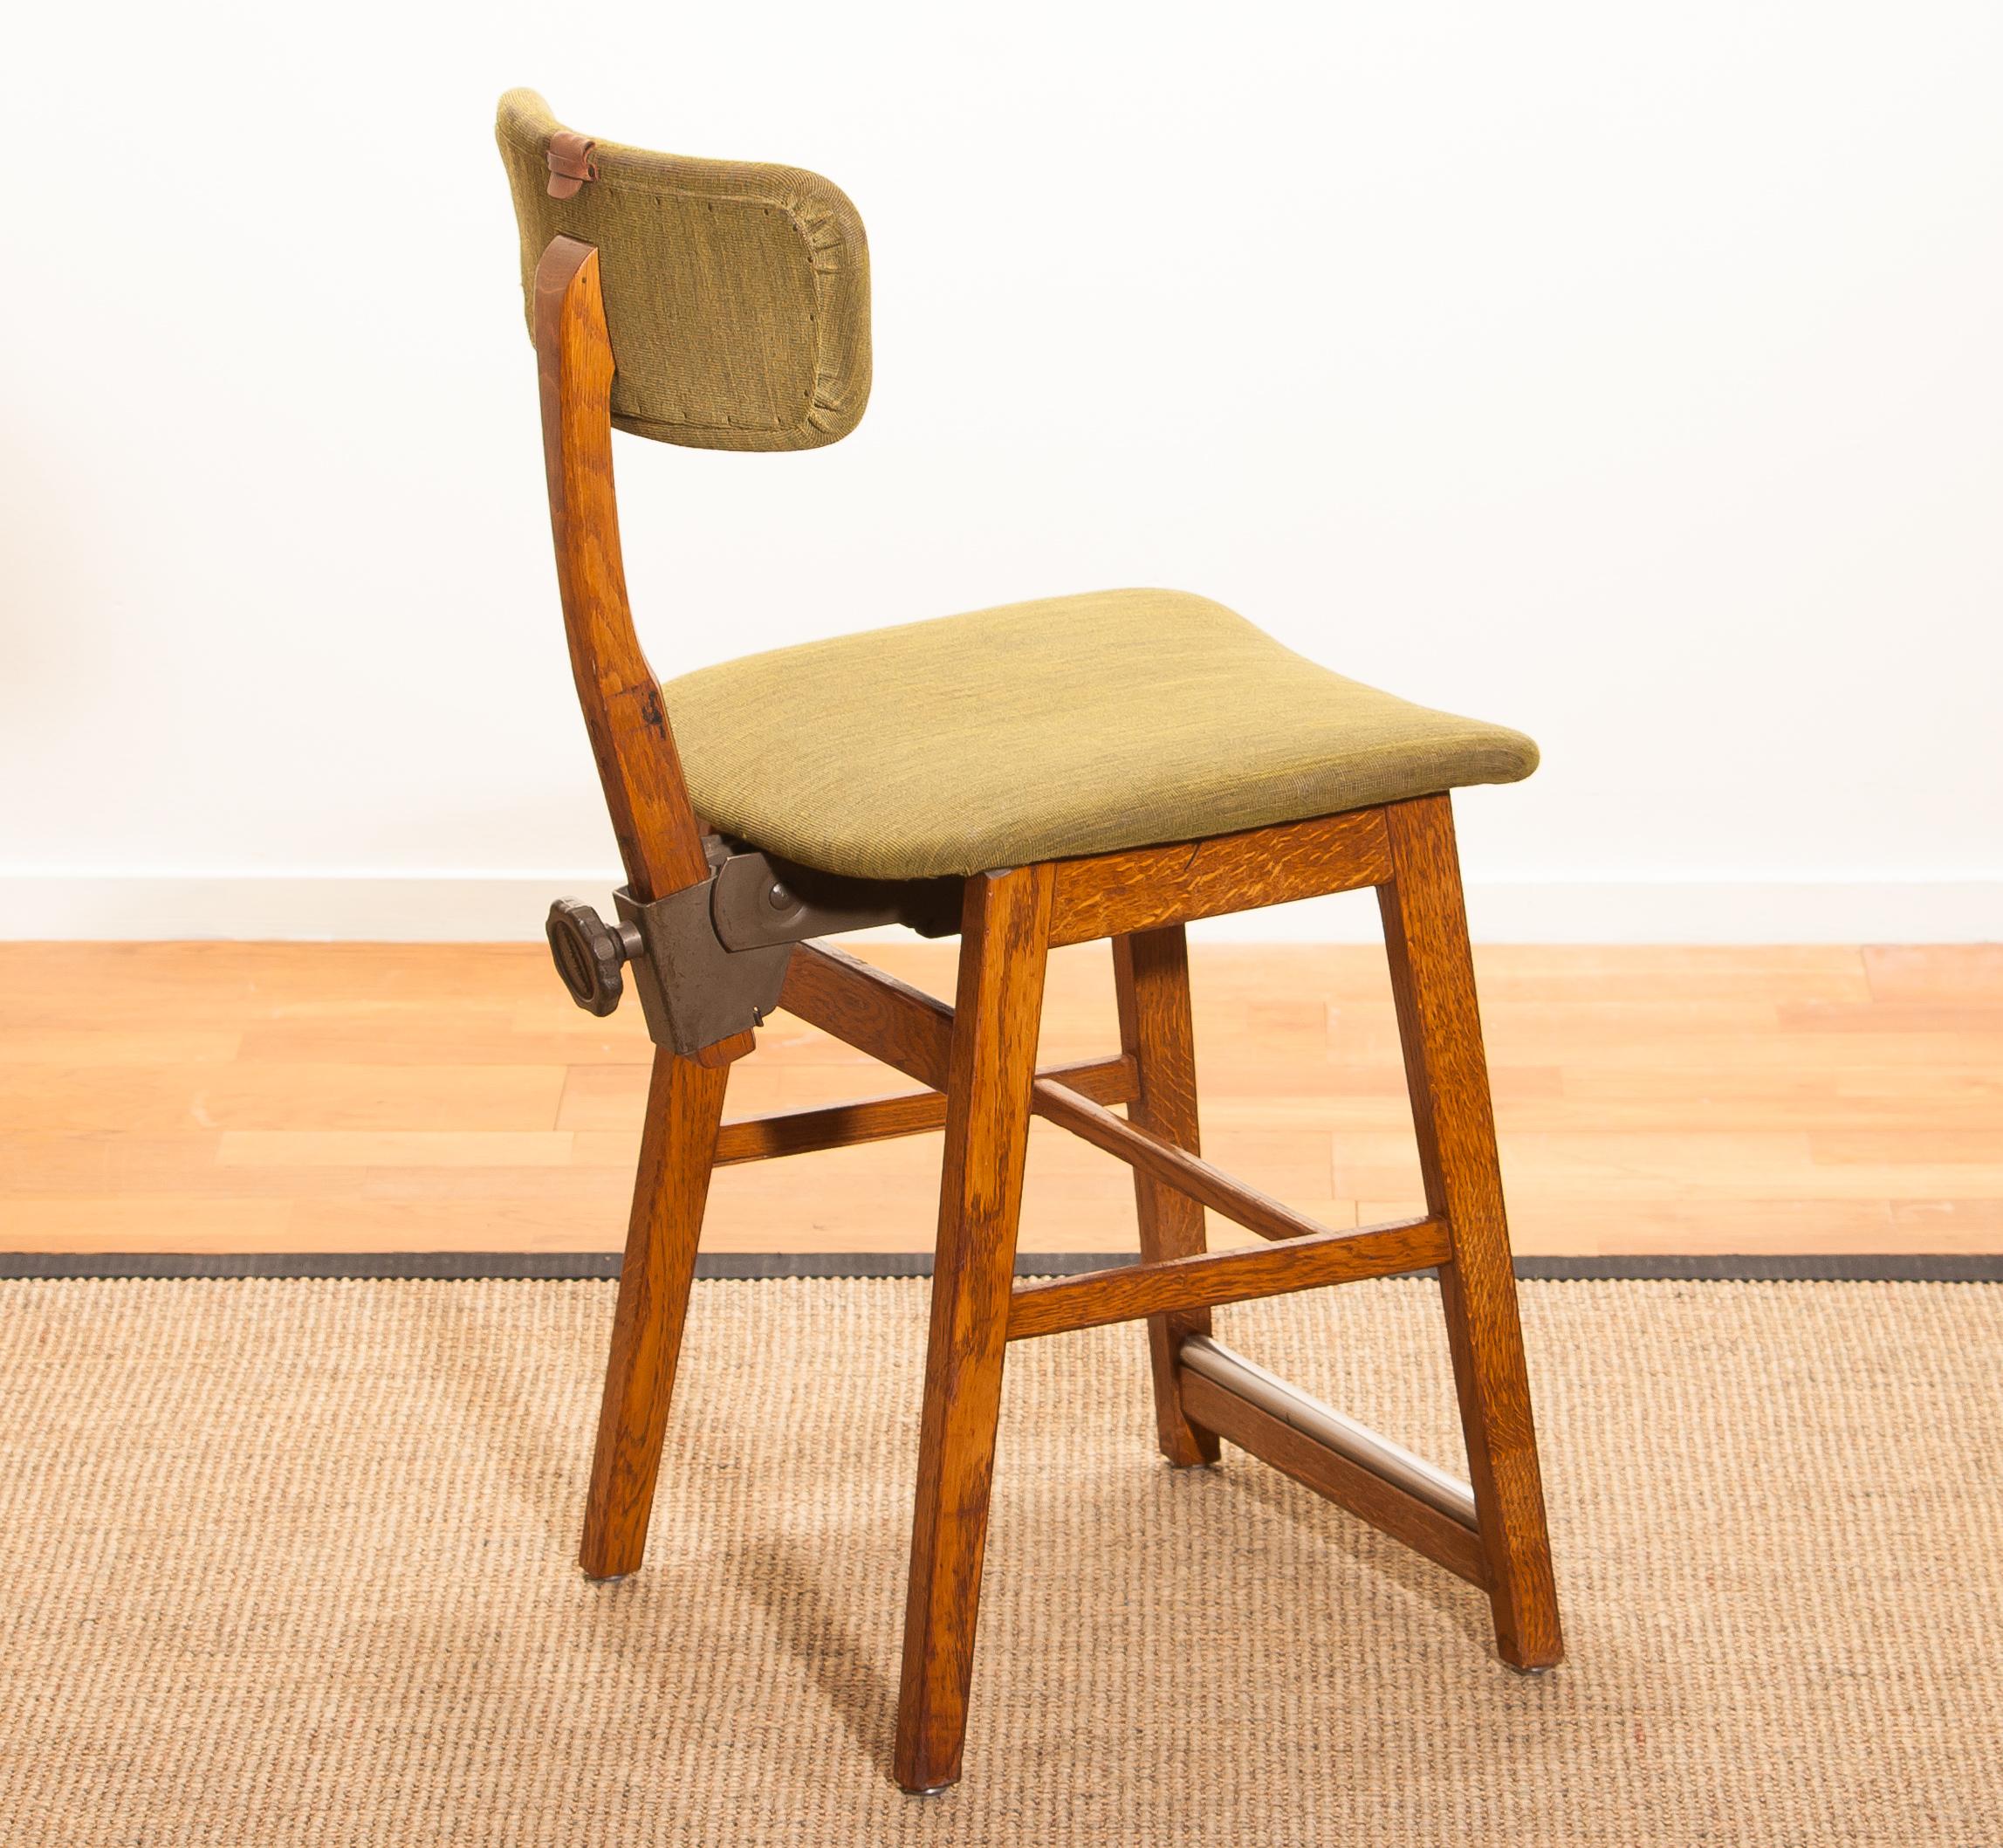 1960s, Teak and Wool Desk Chair by Âtvidabergs, Sweden 2